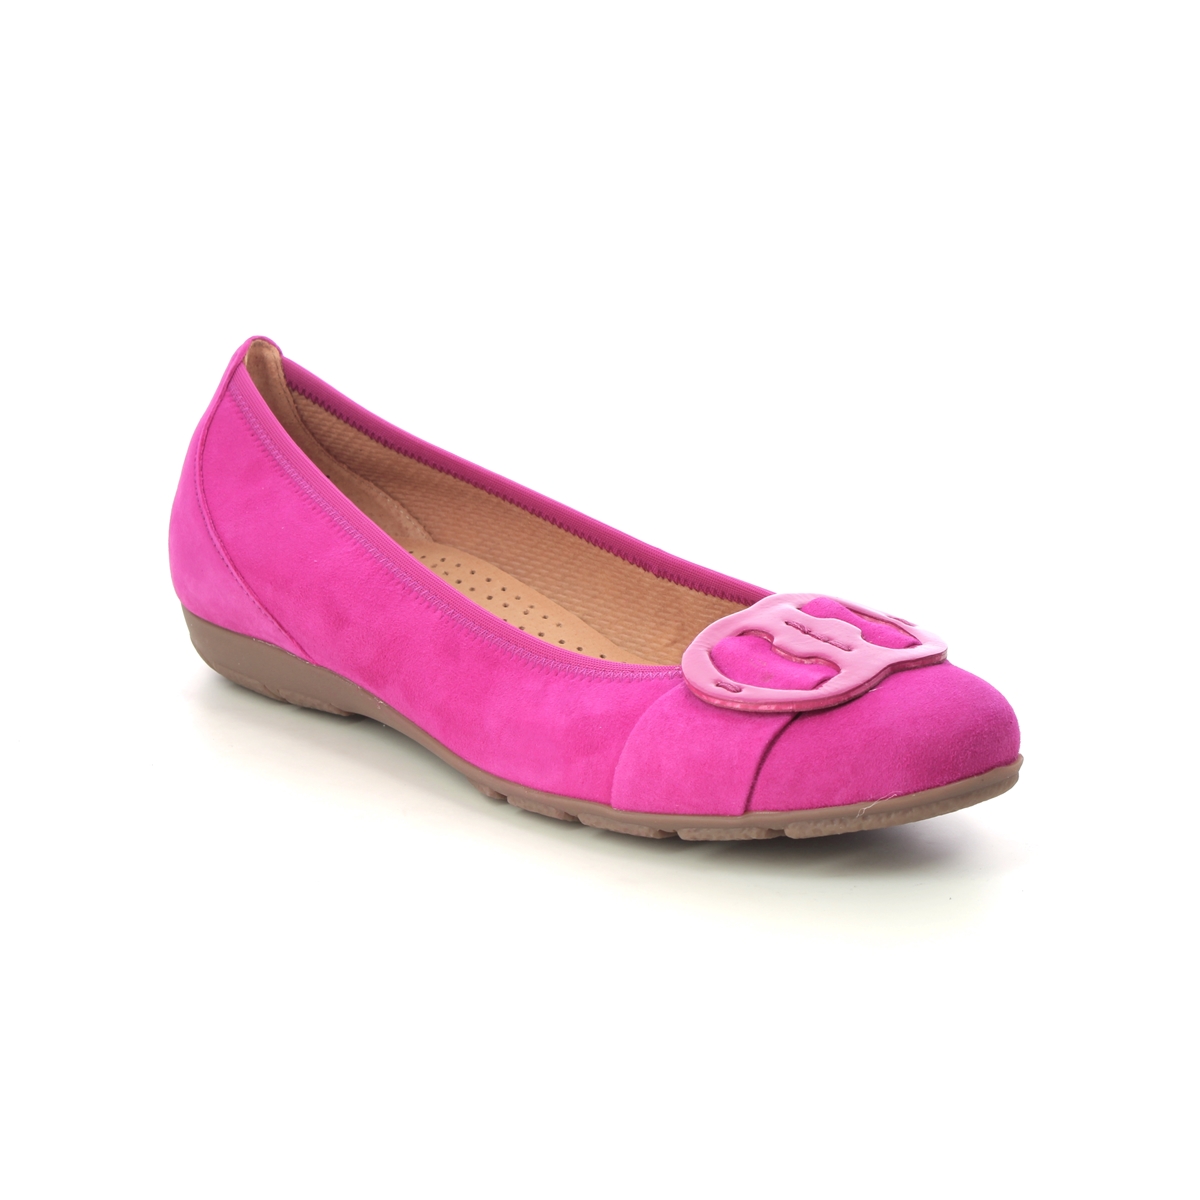 Gabor Rosta Hovercraft Fuchsia Suede Womens pumps 44.163.10 in a Plain Leather in Size 7